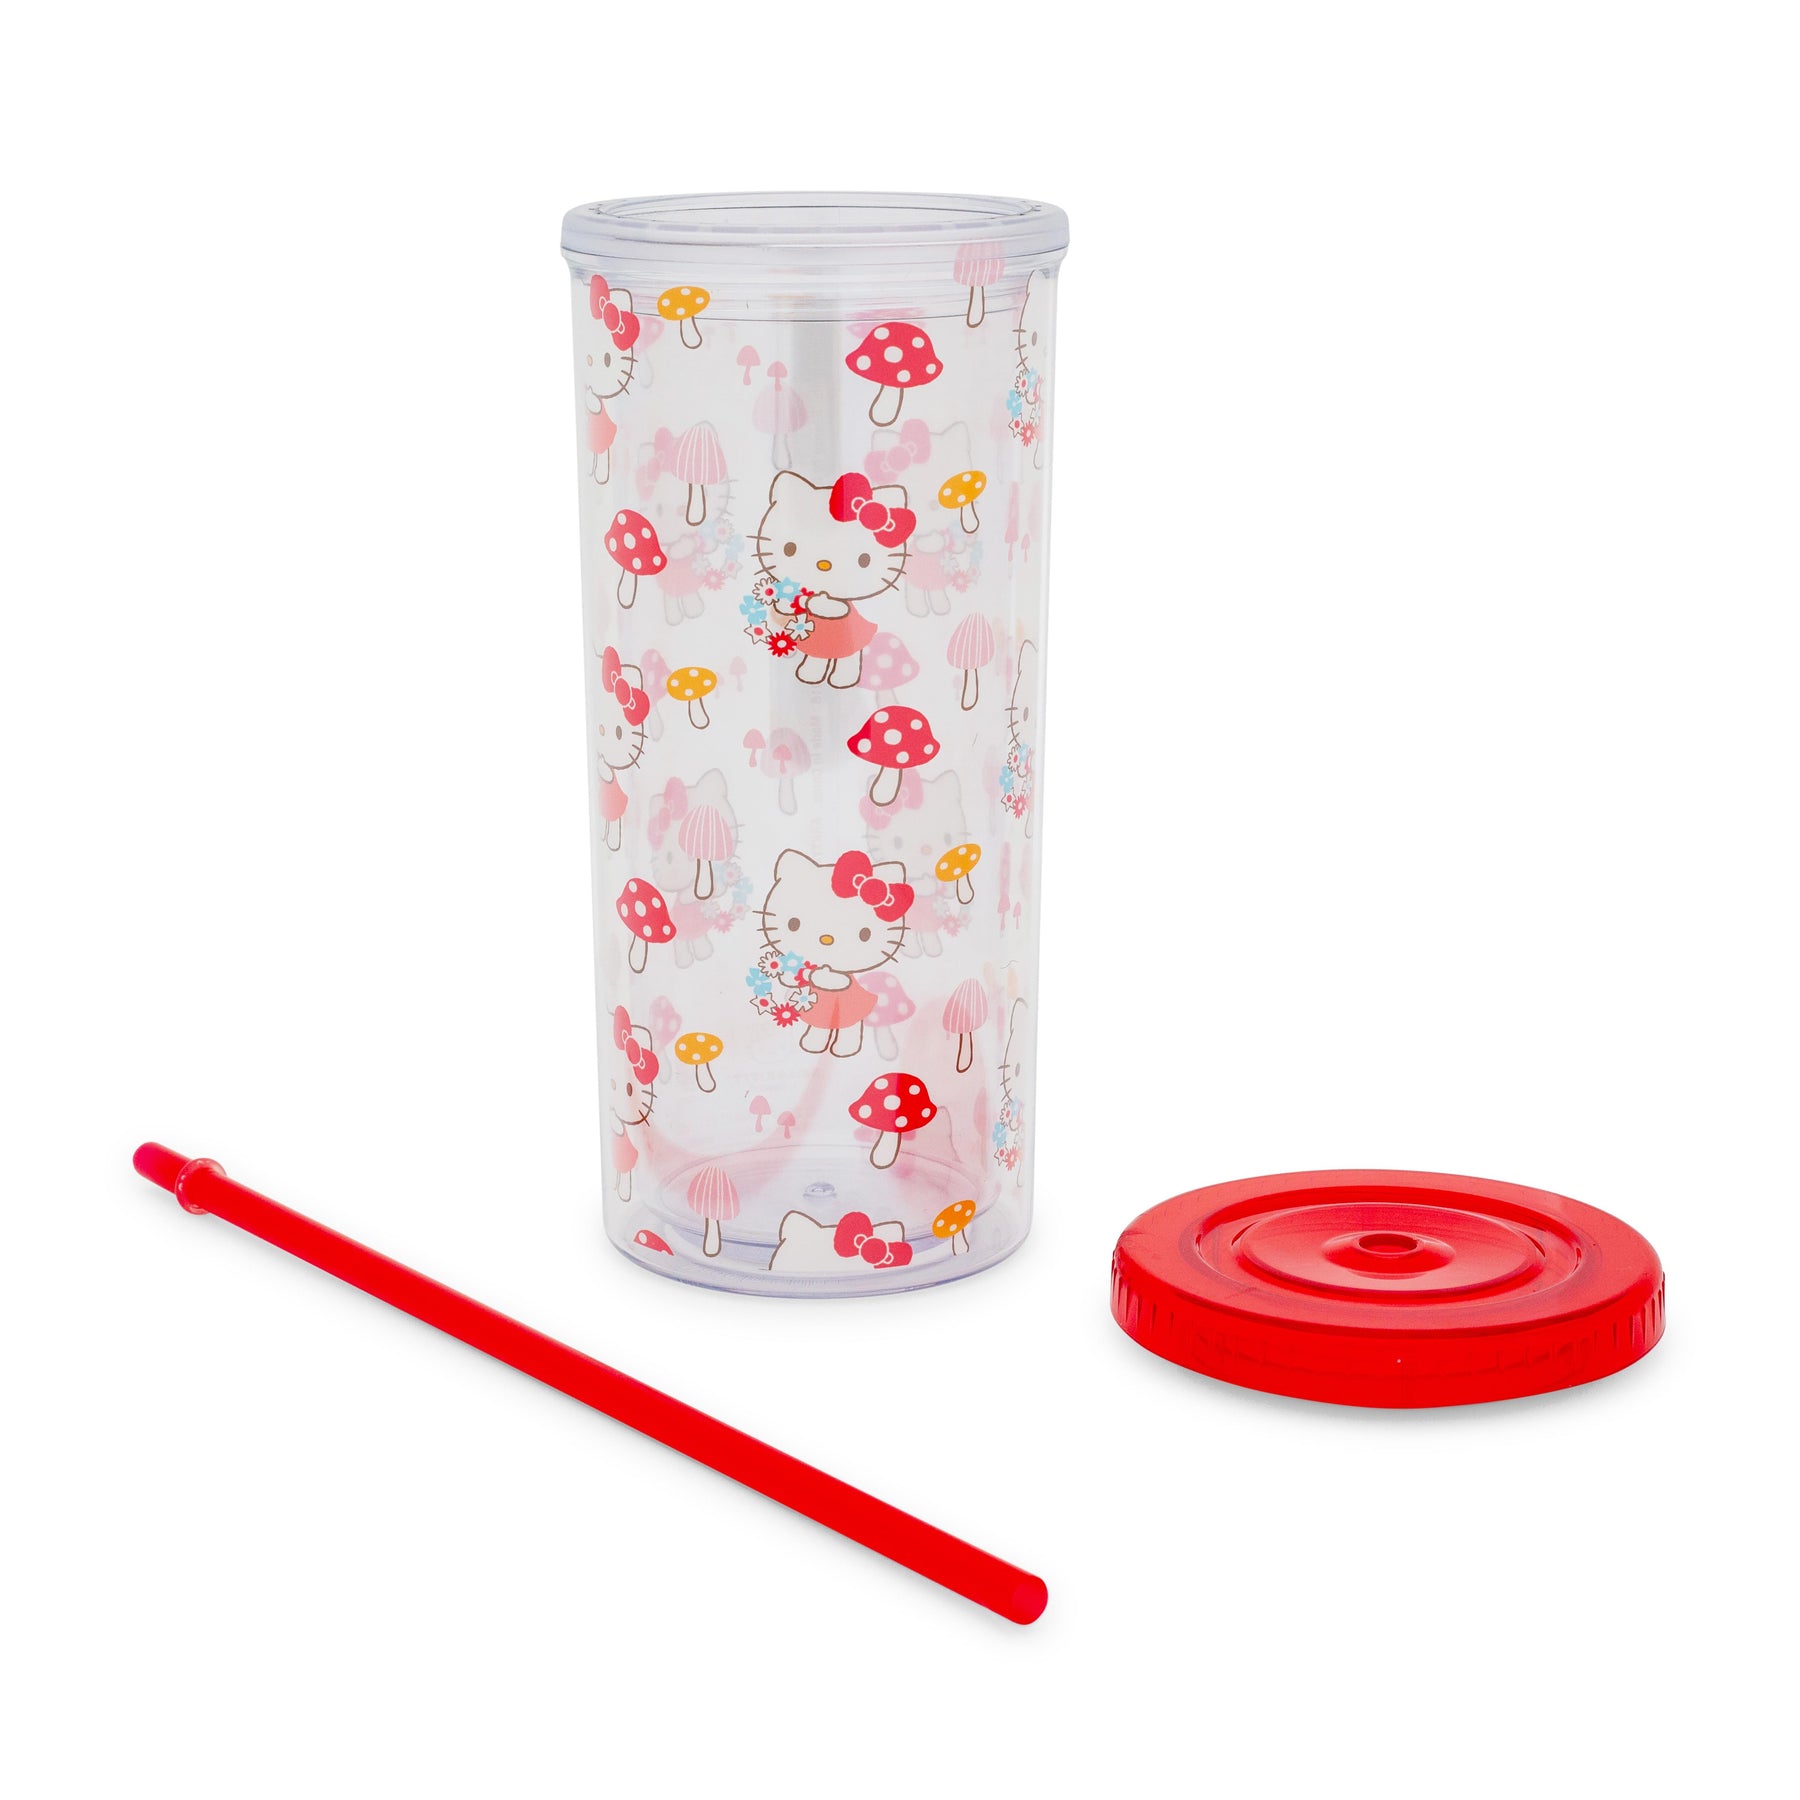 Sanrio Hello Kitty Mushrooms Carnival Cup With Lid and Straw | Holds 20 Ounces